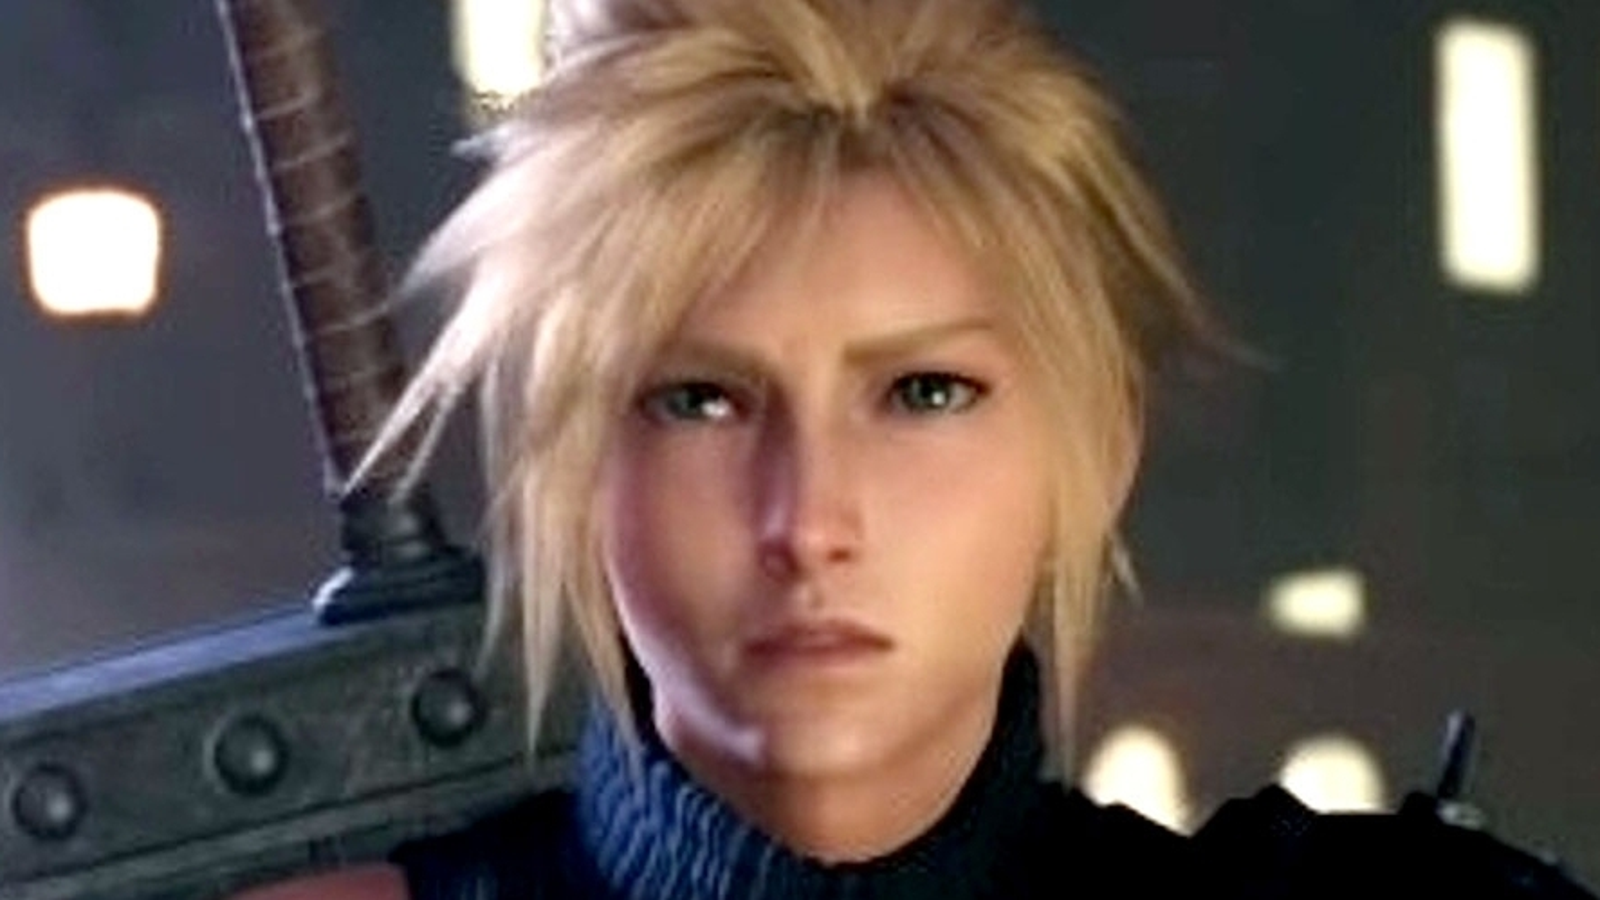 Final Fantasy 7 Remake: PS4 Pro vs PS4 Comparison, Frame Rate Analysis And  More